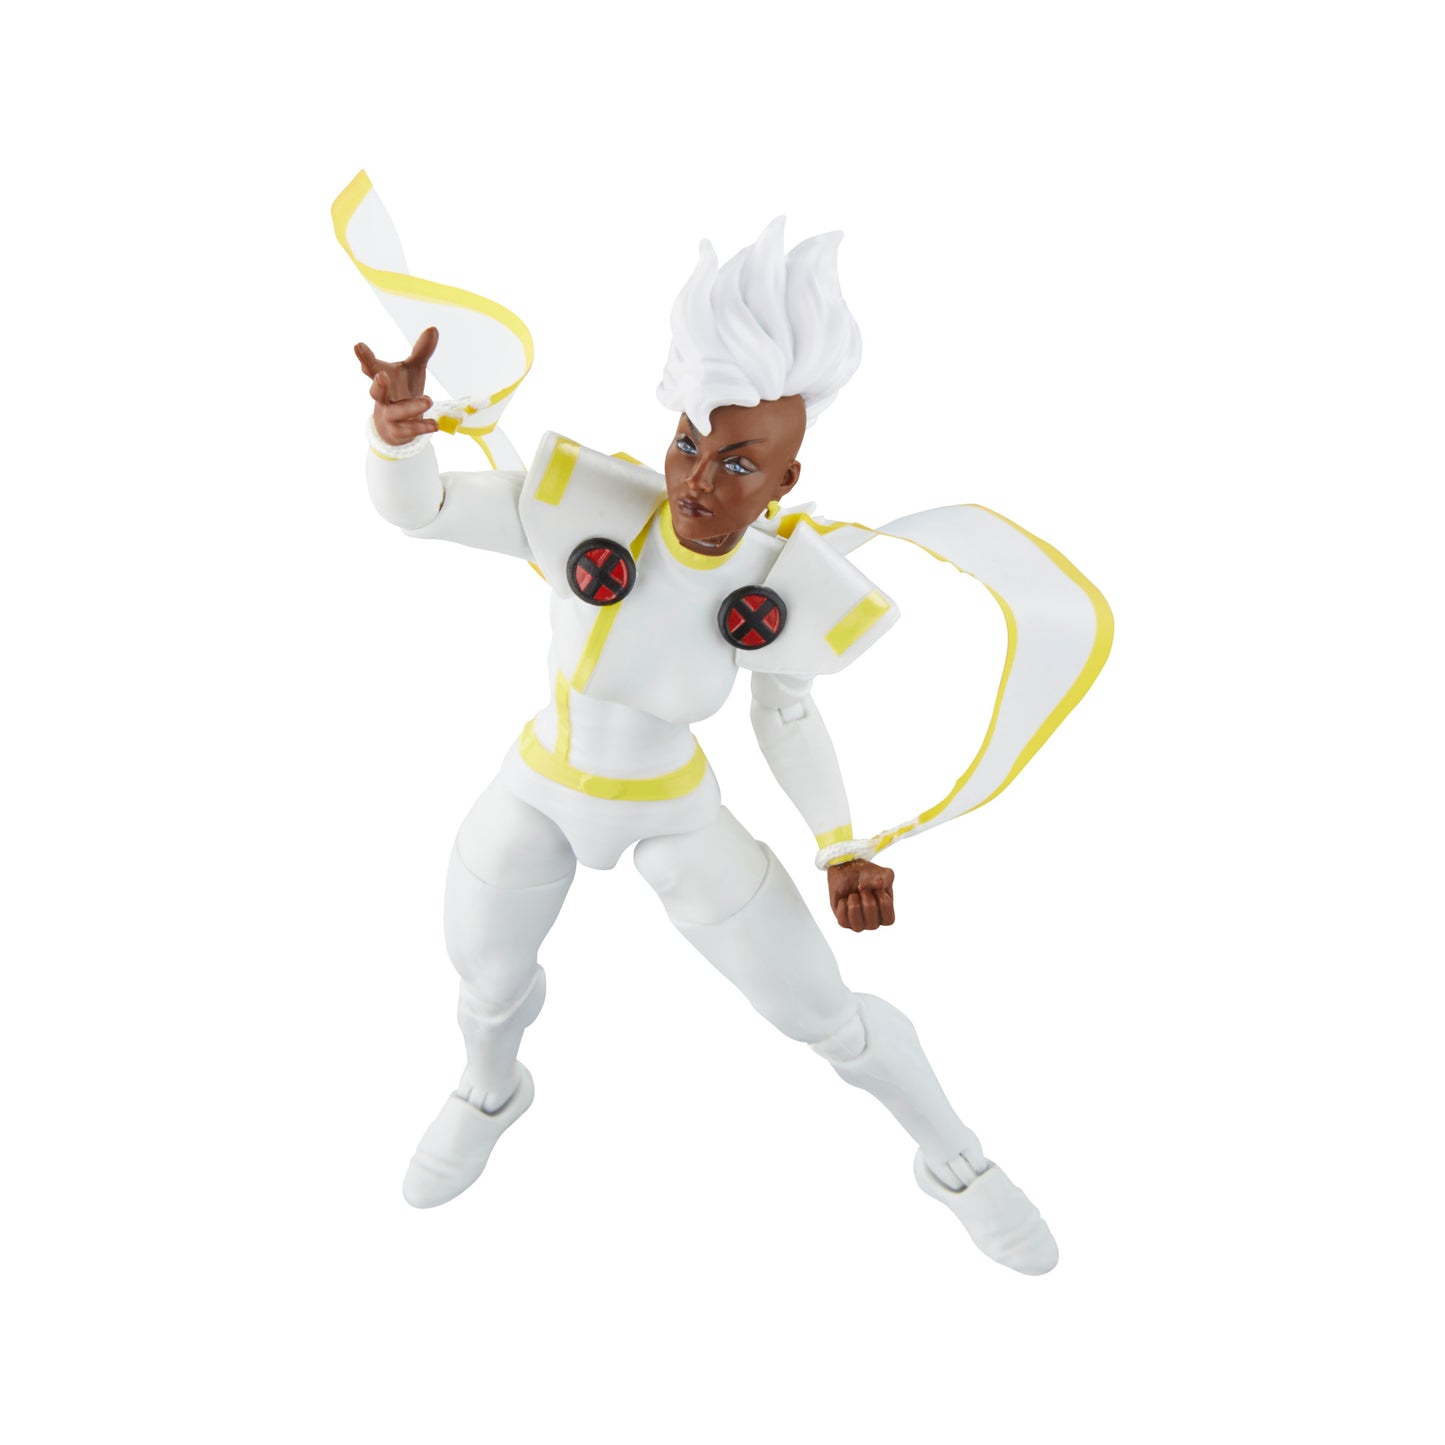 Hasbro Marvel Legends Series Storm Action Figure Toy swag posed - Heretoserveyou